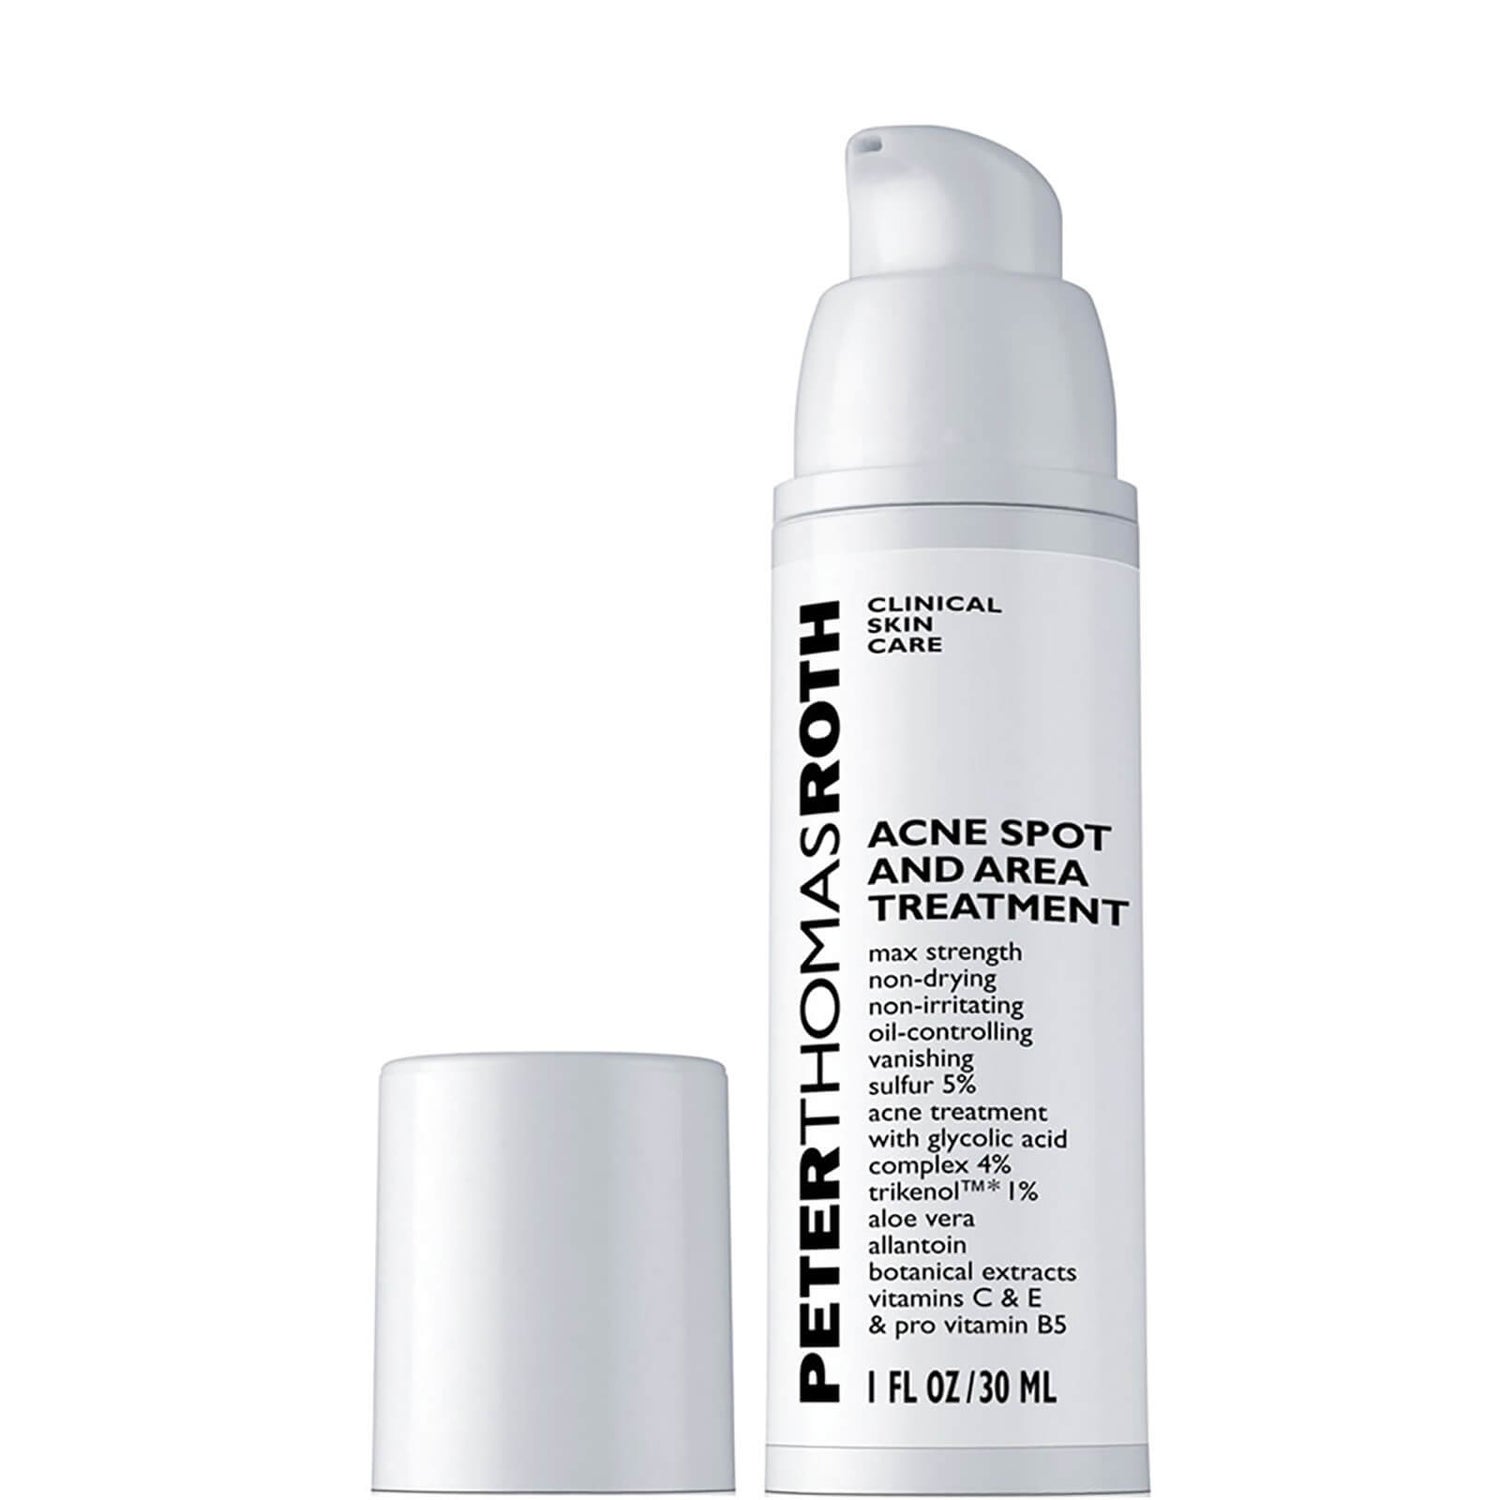 Peter Thomas Roth Acne Spot and Area Treatment 30 ml